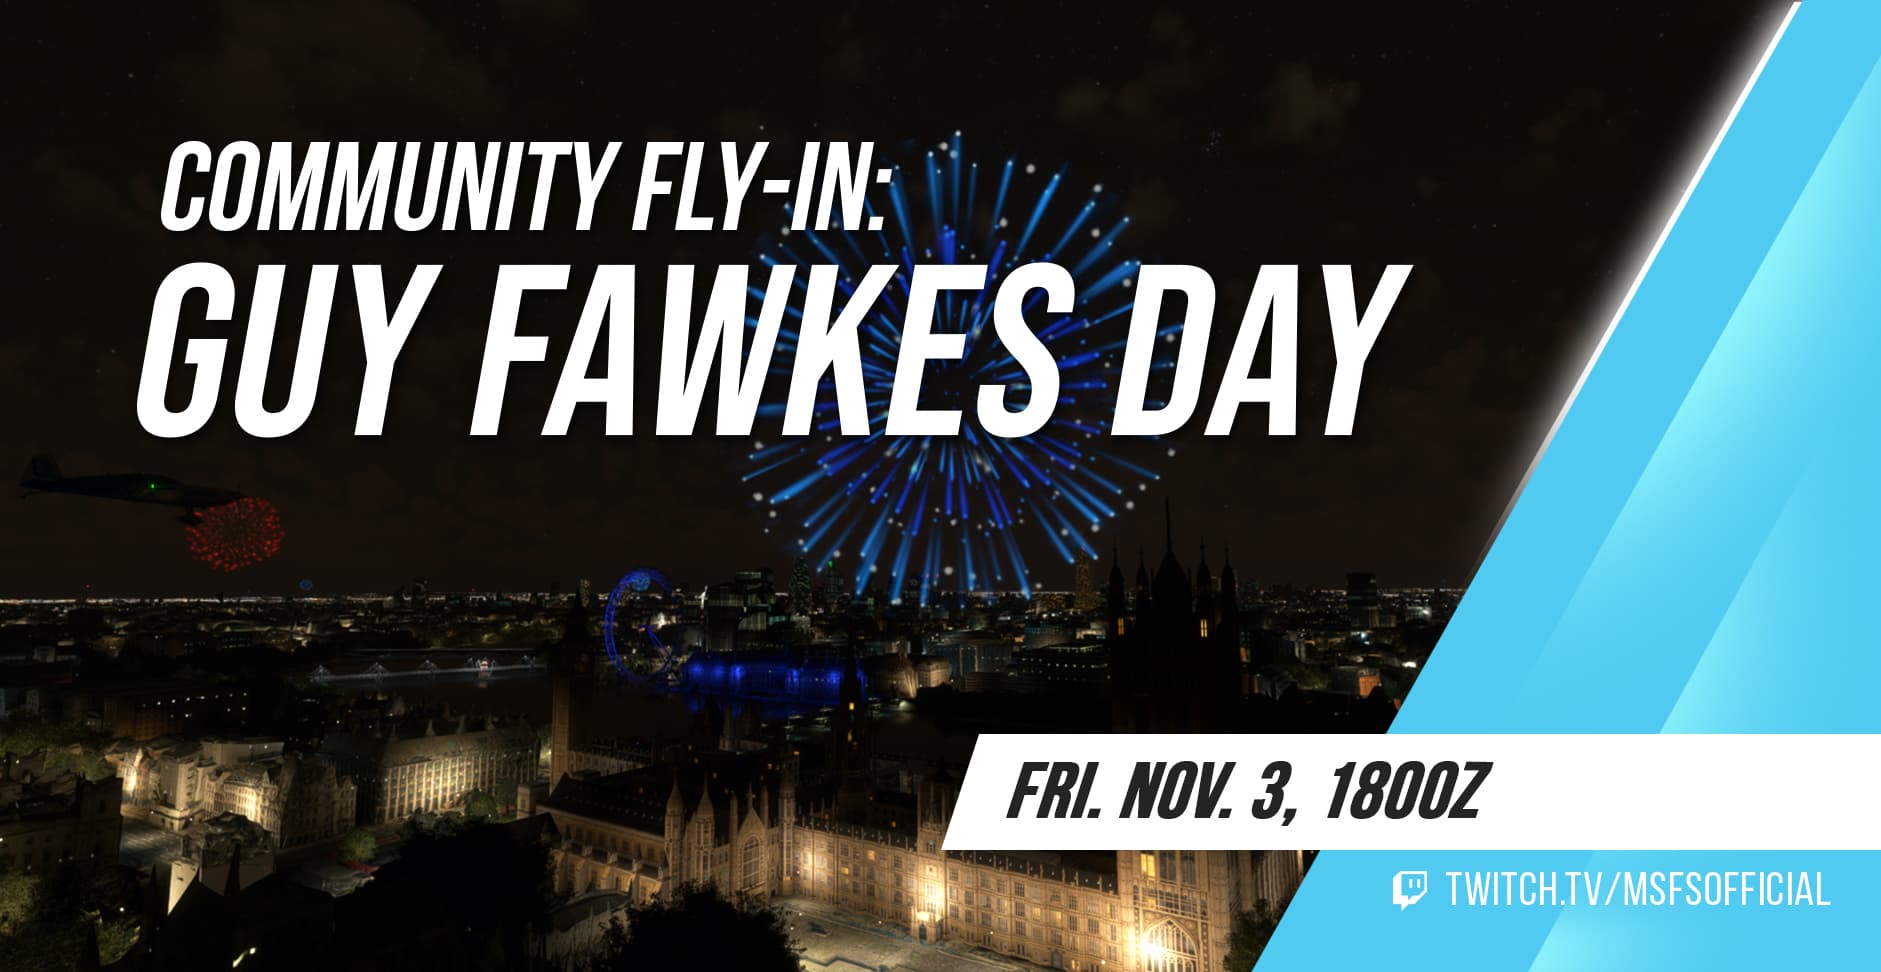 Official] Community Fly-In Friday: CERN - Community Events